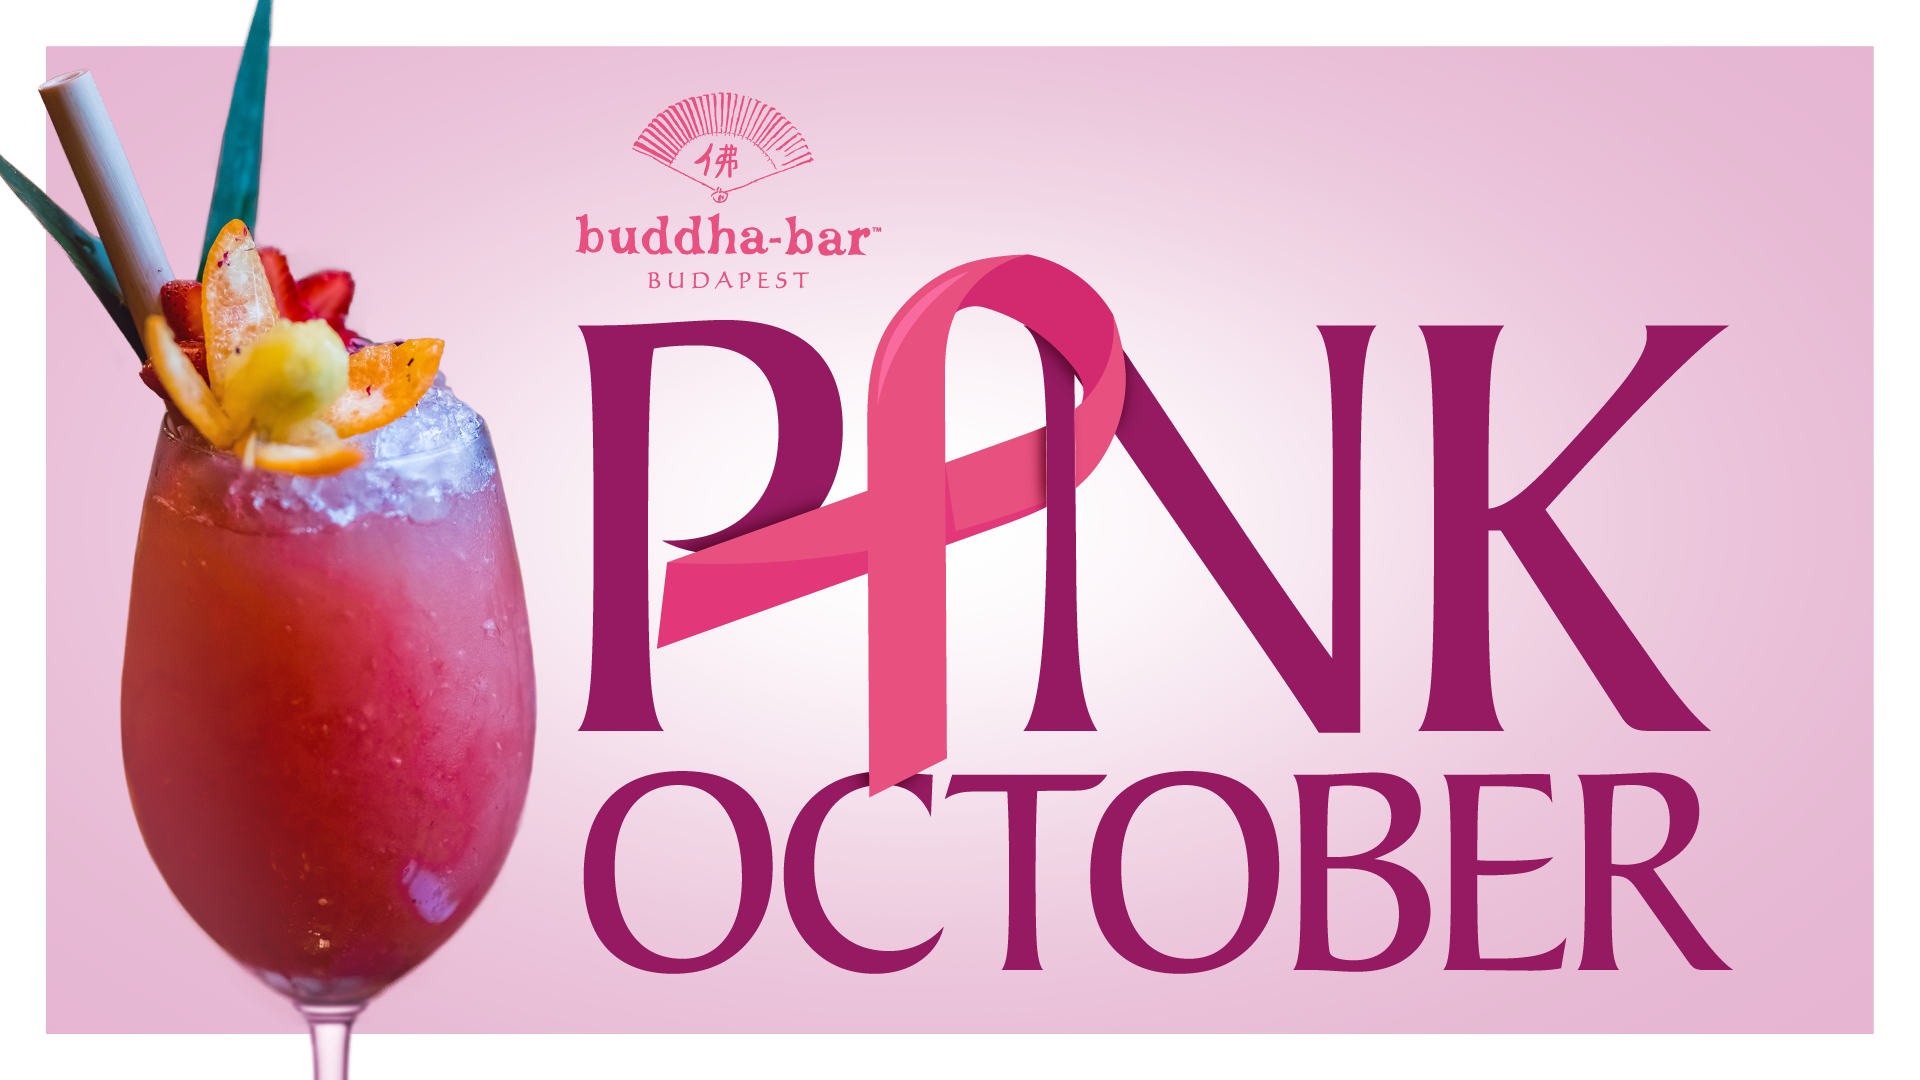 Buddha-Bar Hotel Budapest Joins Cancer Awareness Campaign In October